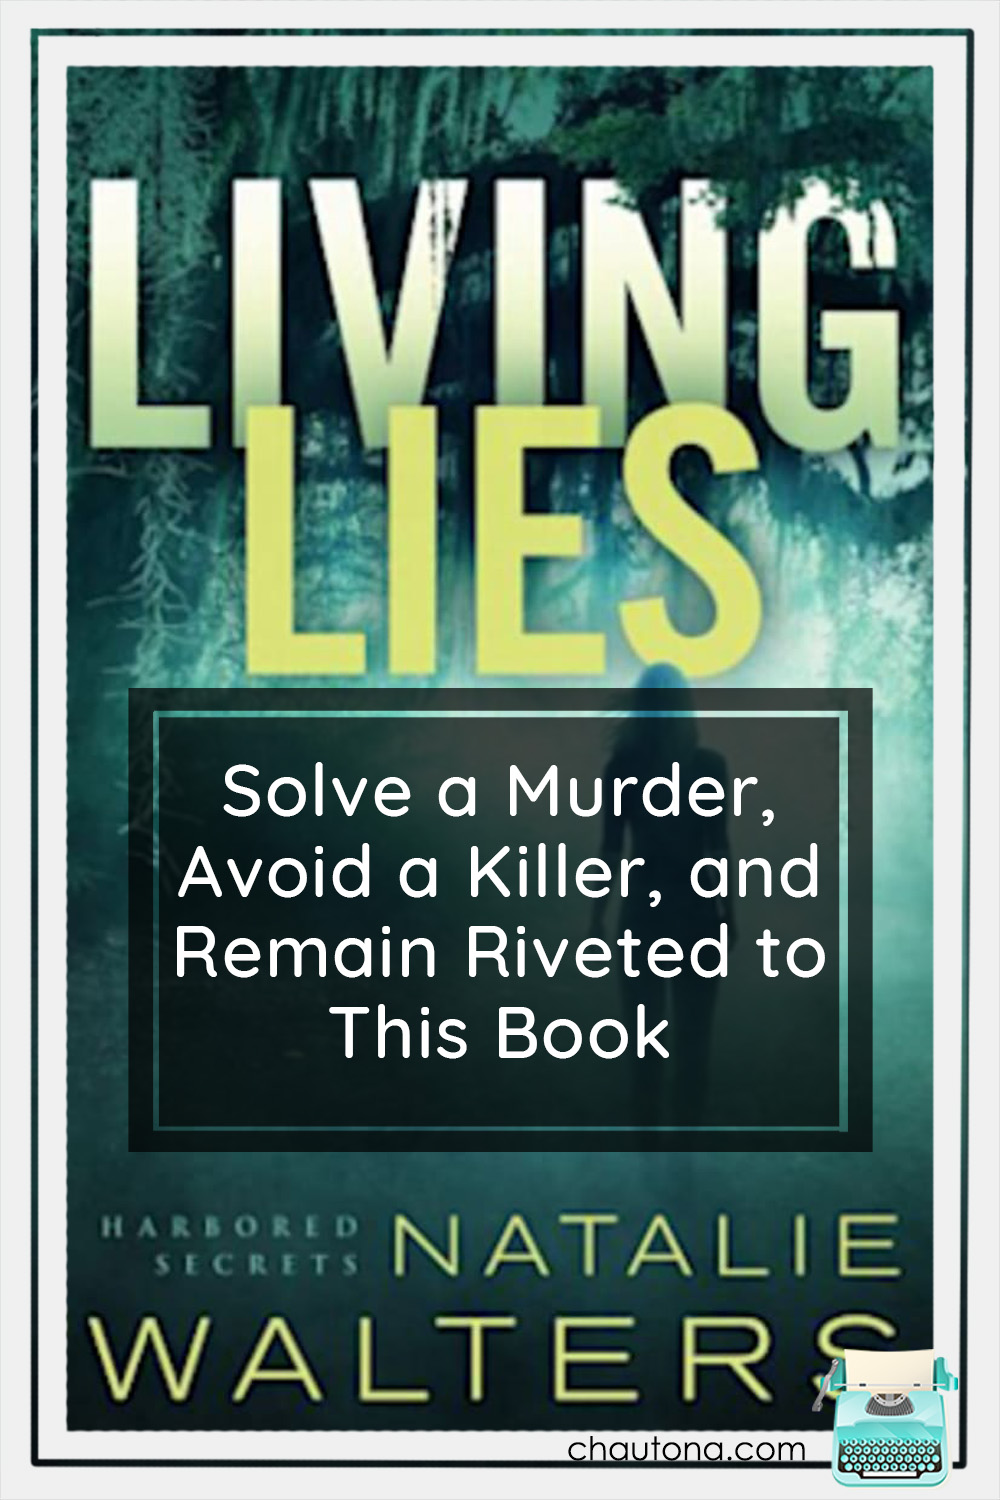 Living Lies by Natalie Walters will keep you riveted to the page and tug at your heartstrings all at the same time. via @chautonahavig